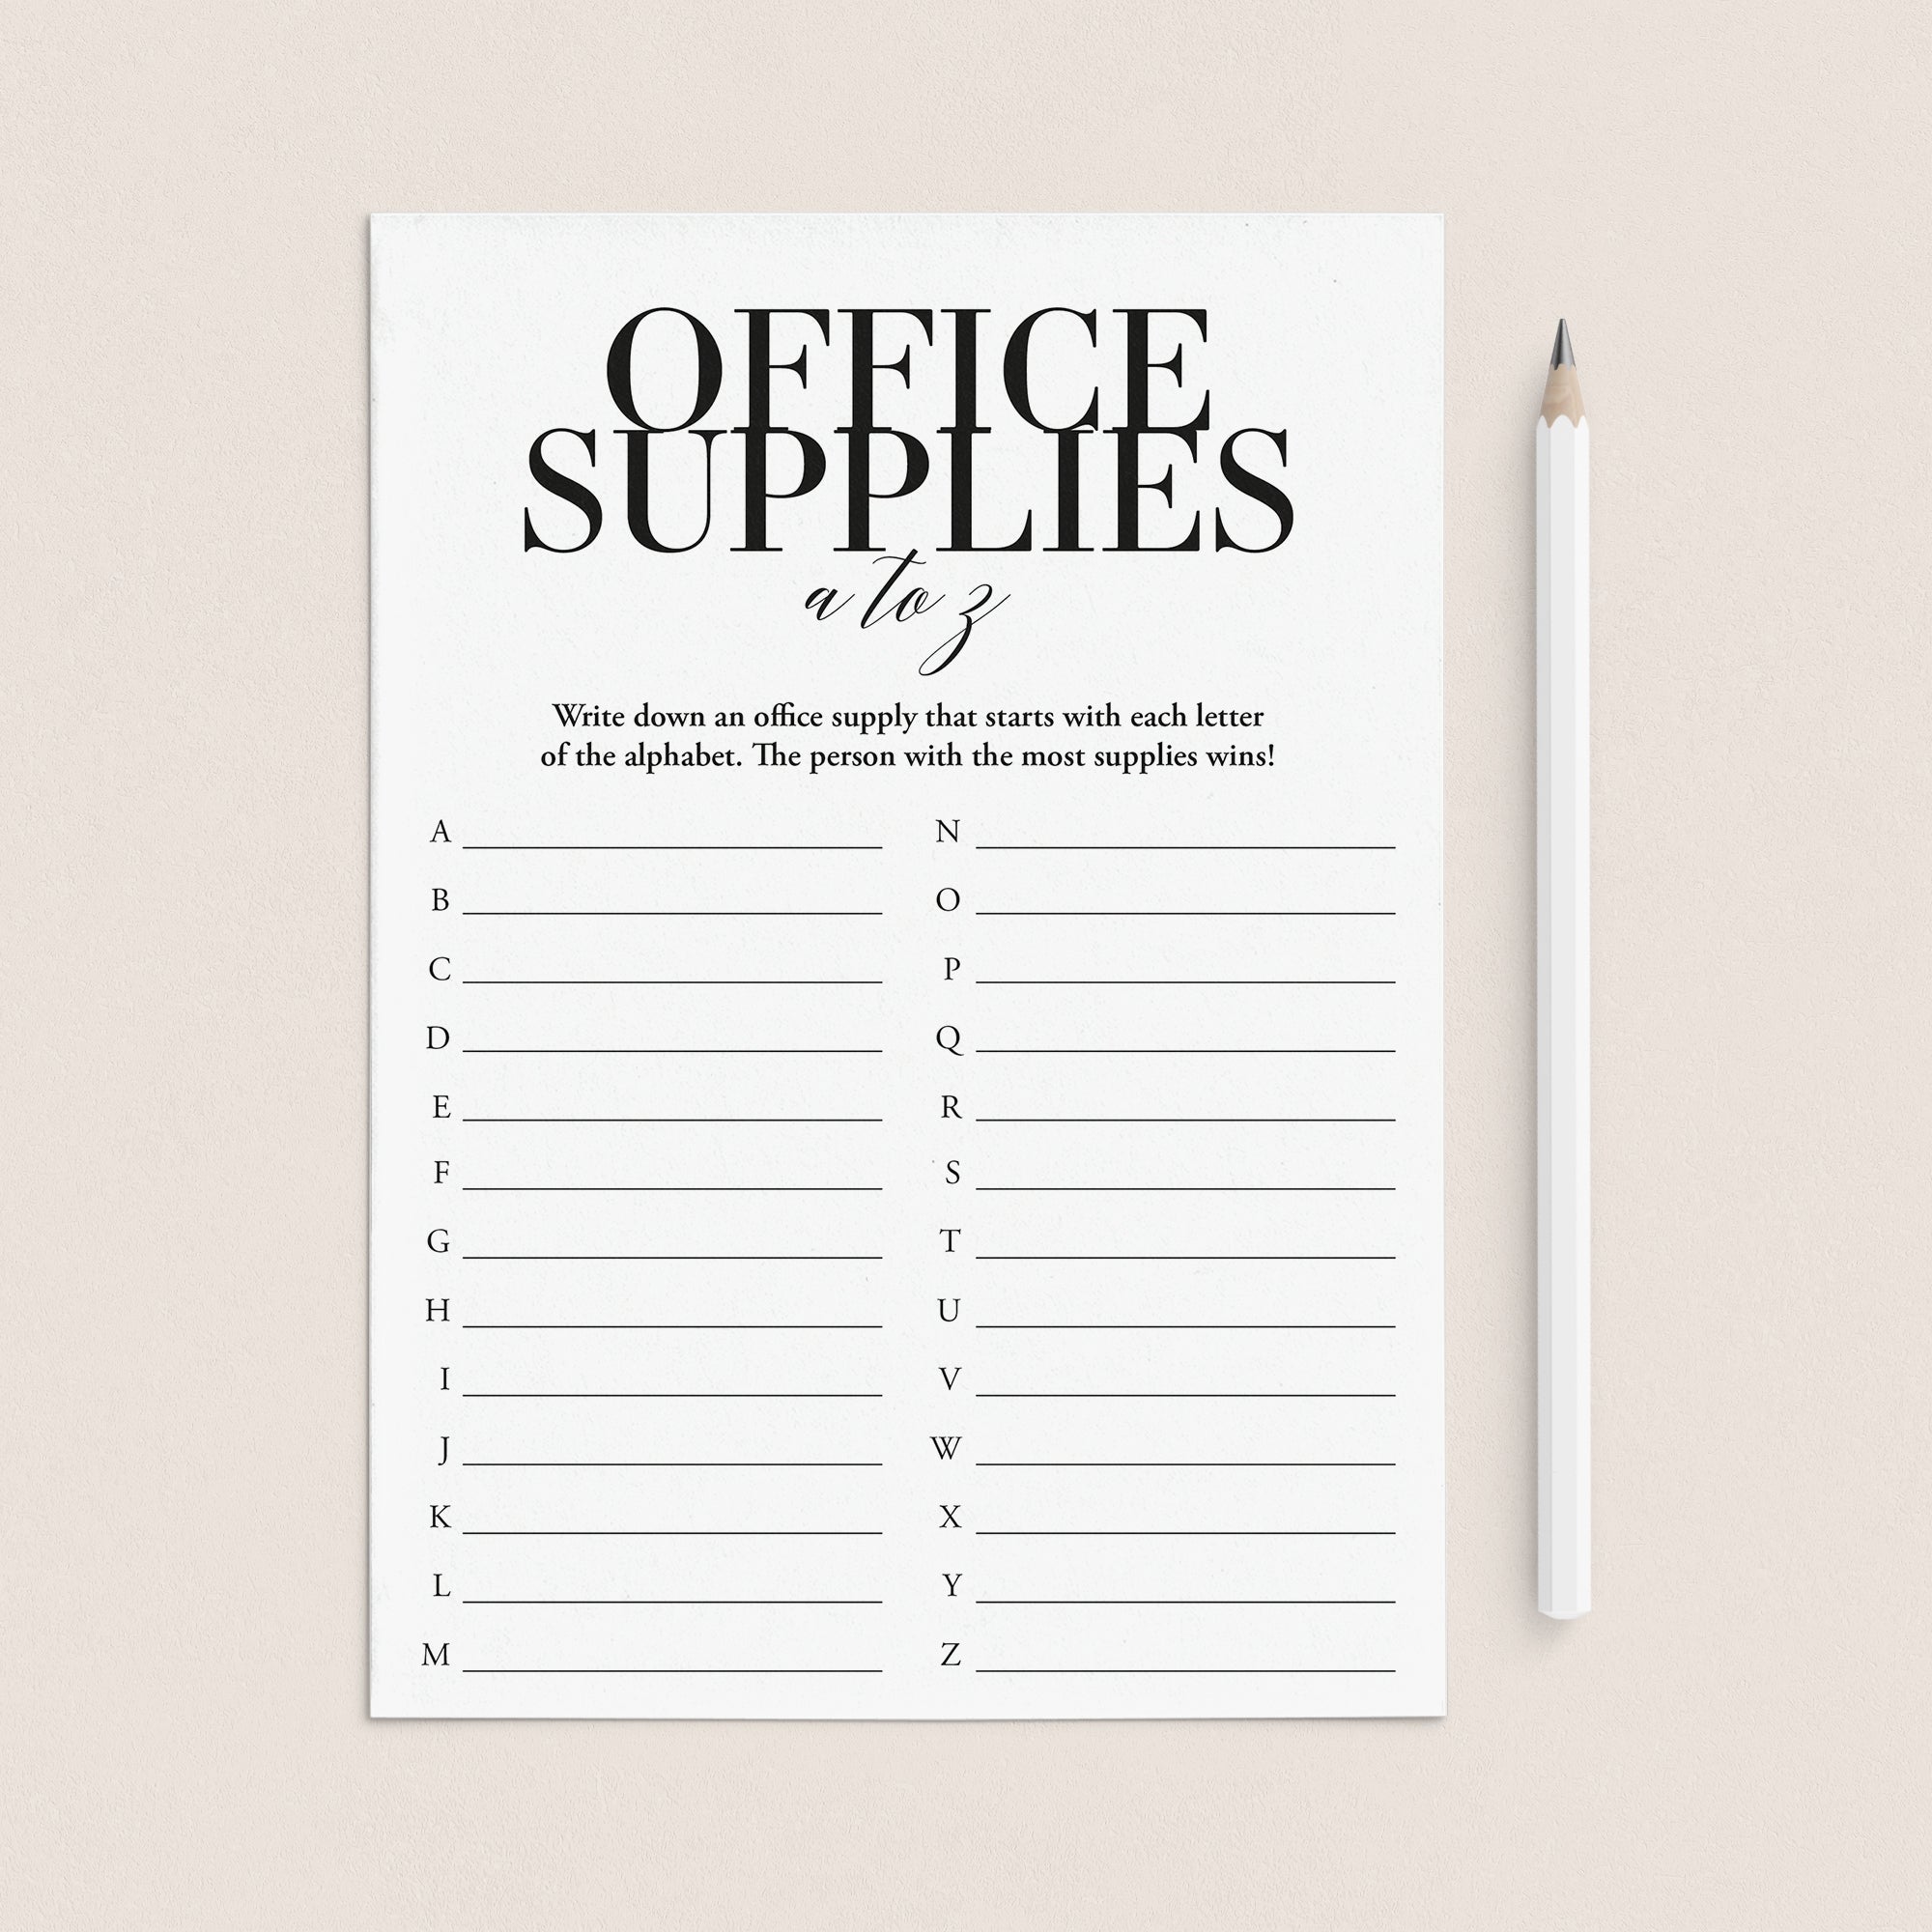 Free Downloadable Office Supply Checklist Form